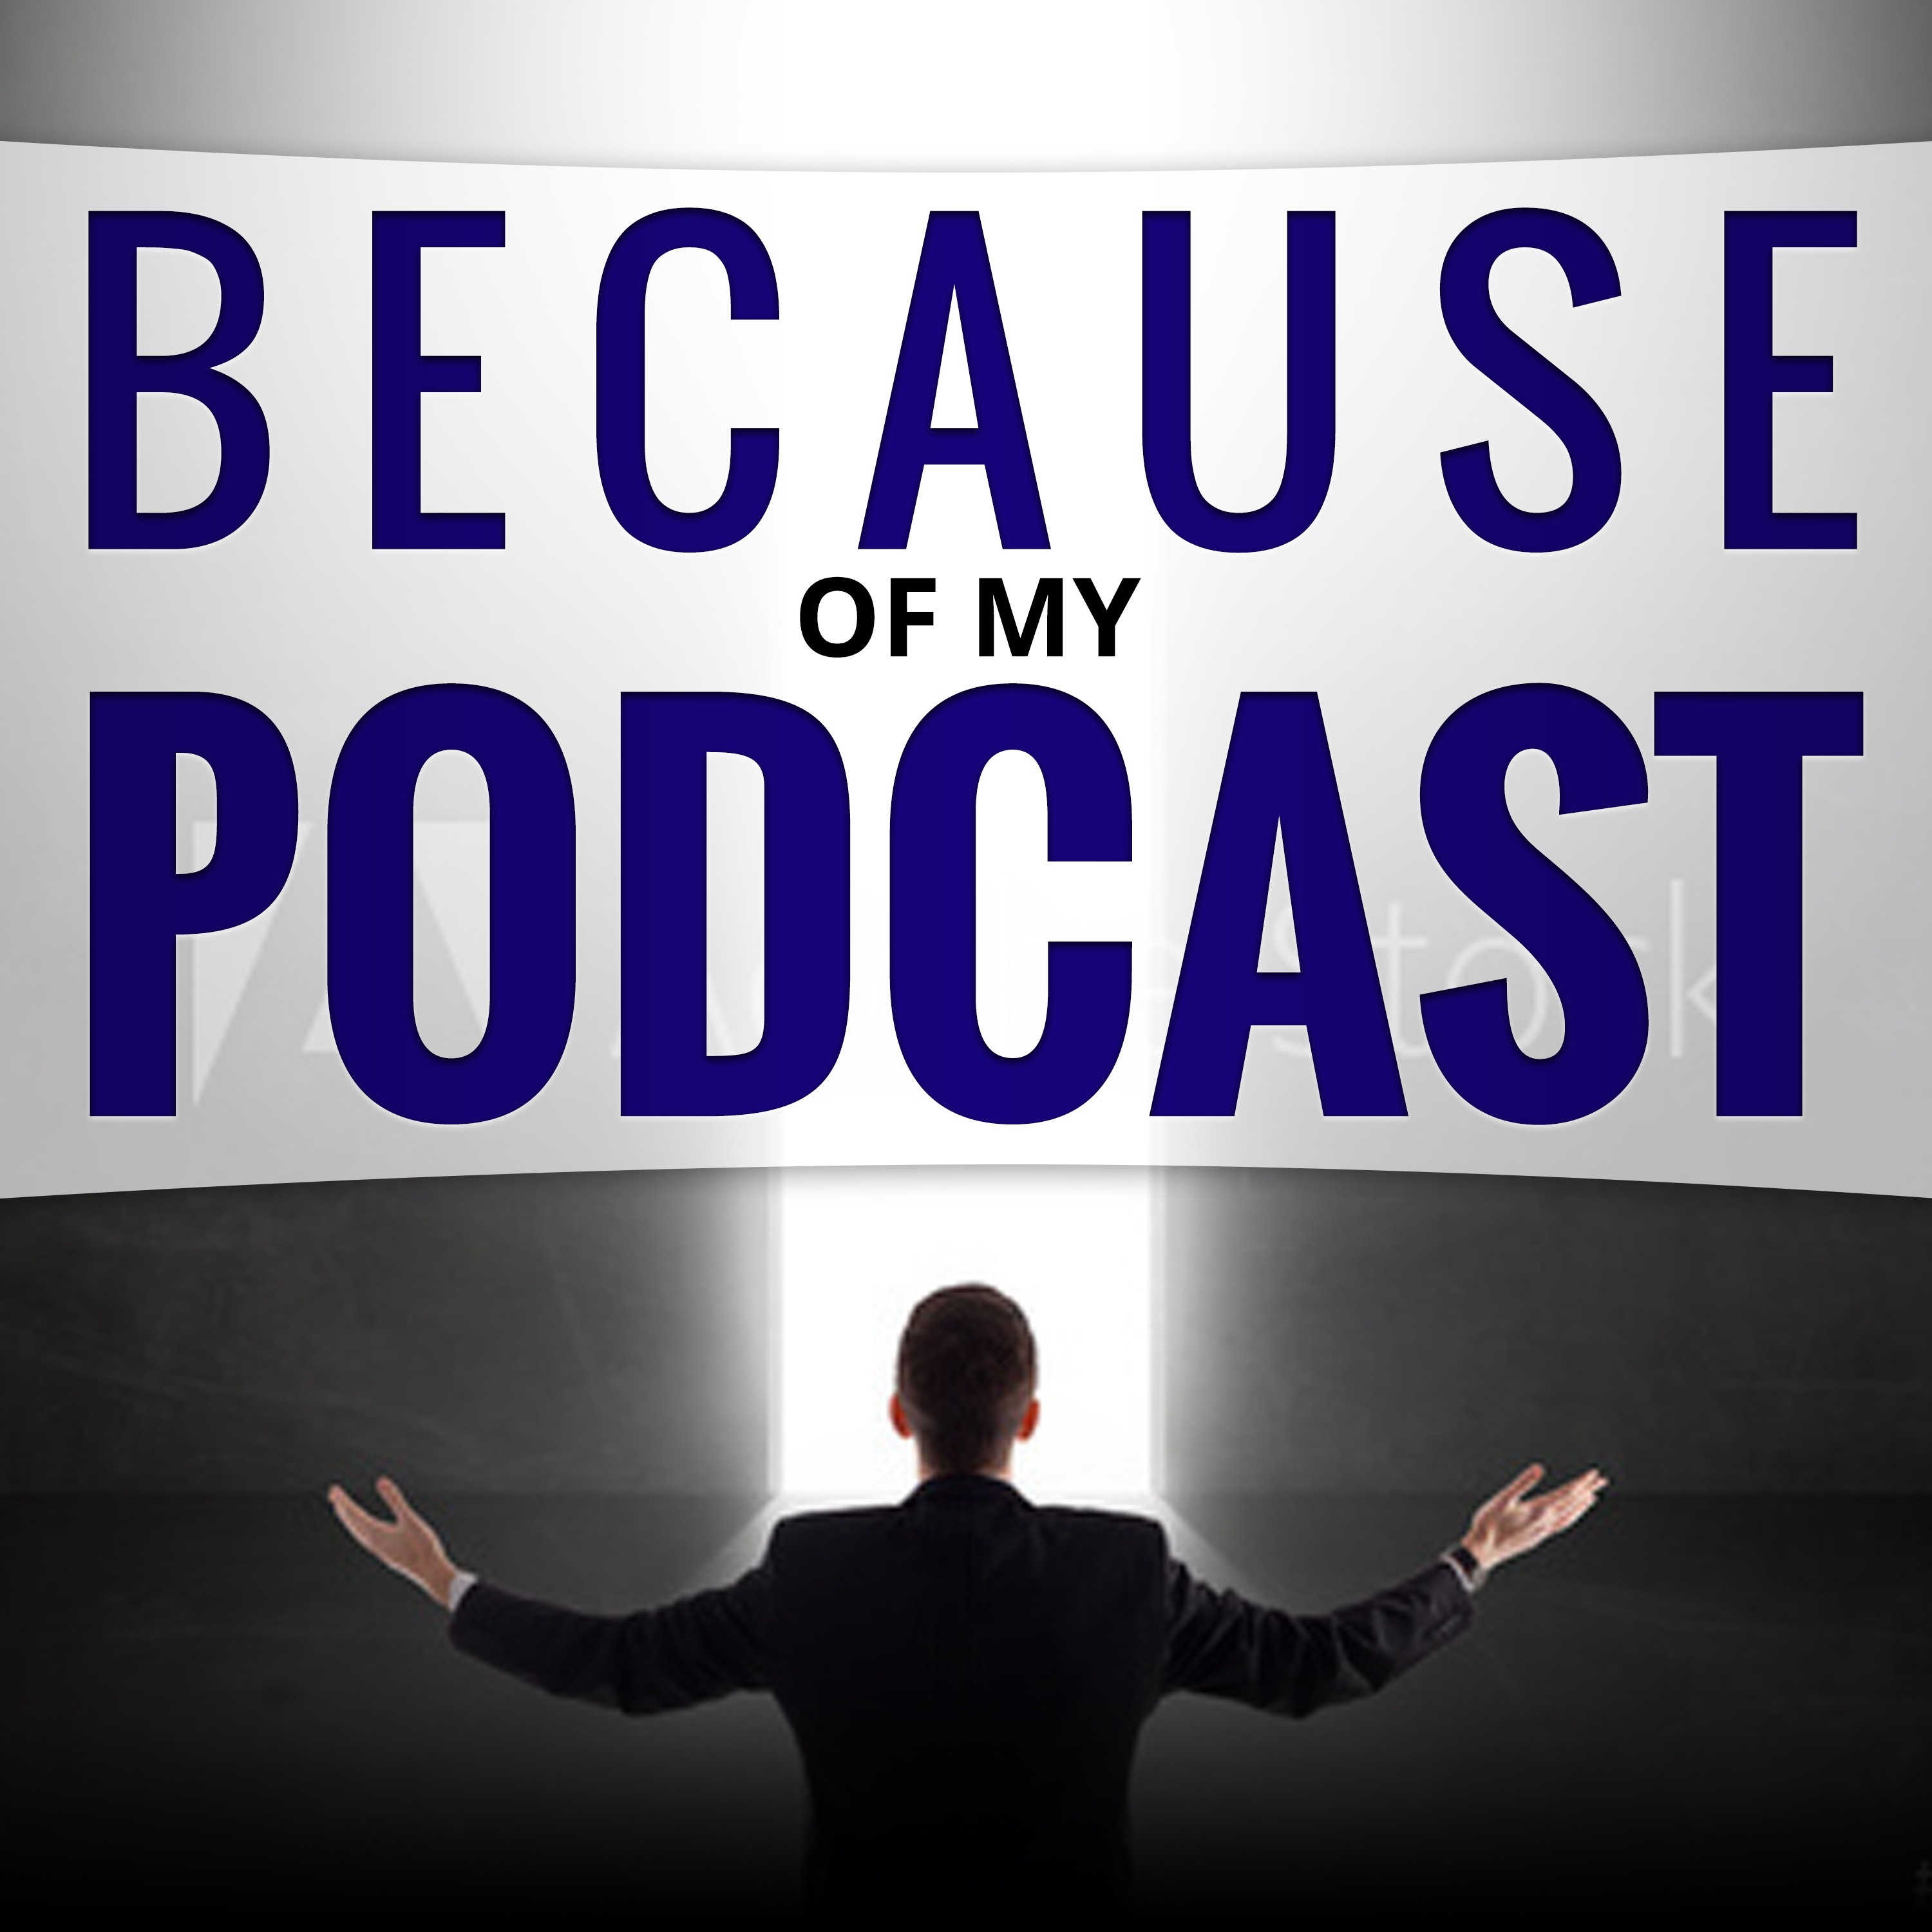 Because of My Podcast